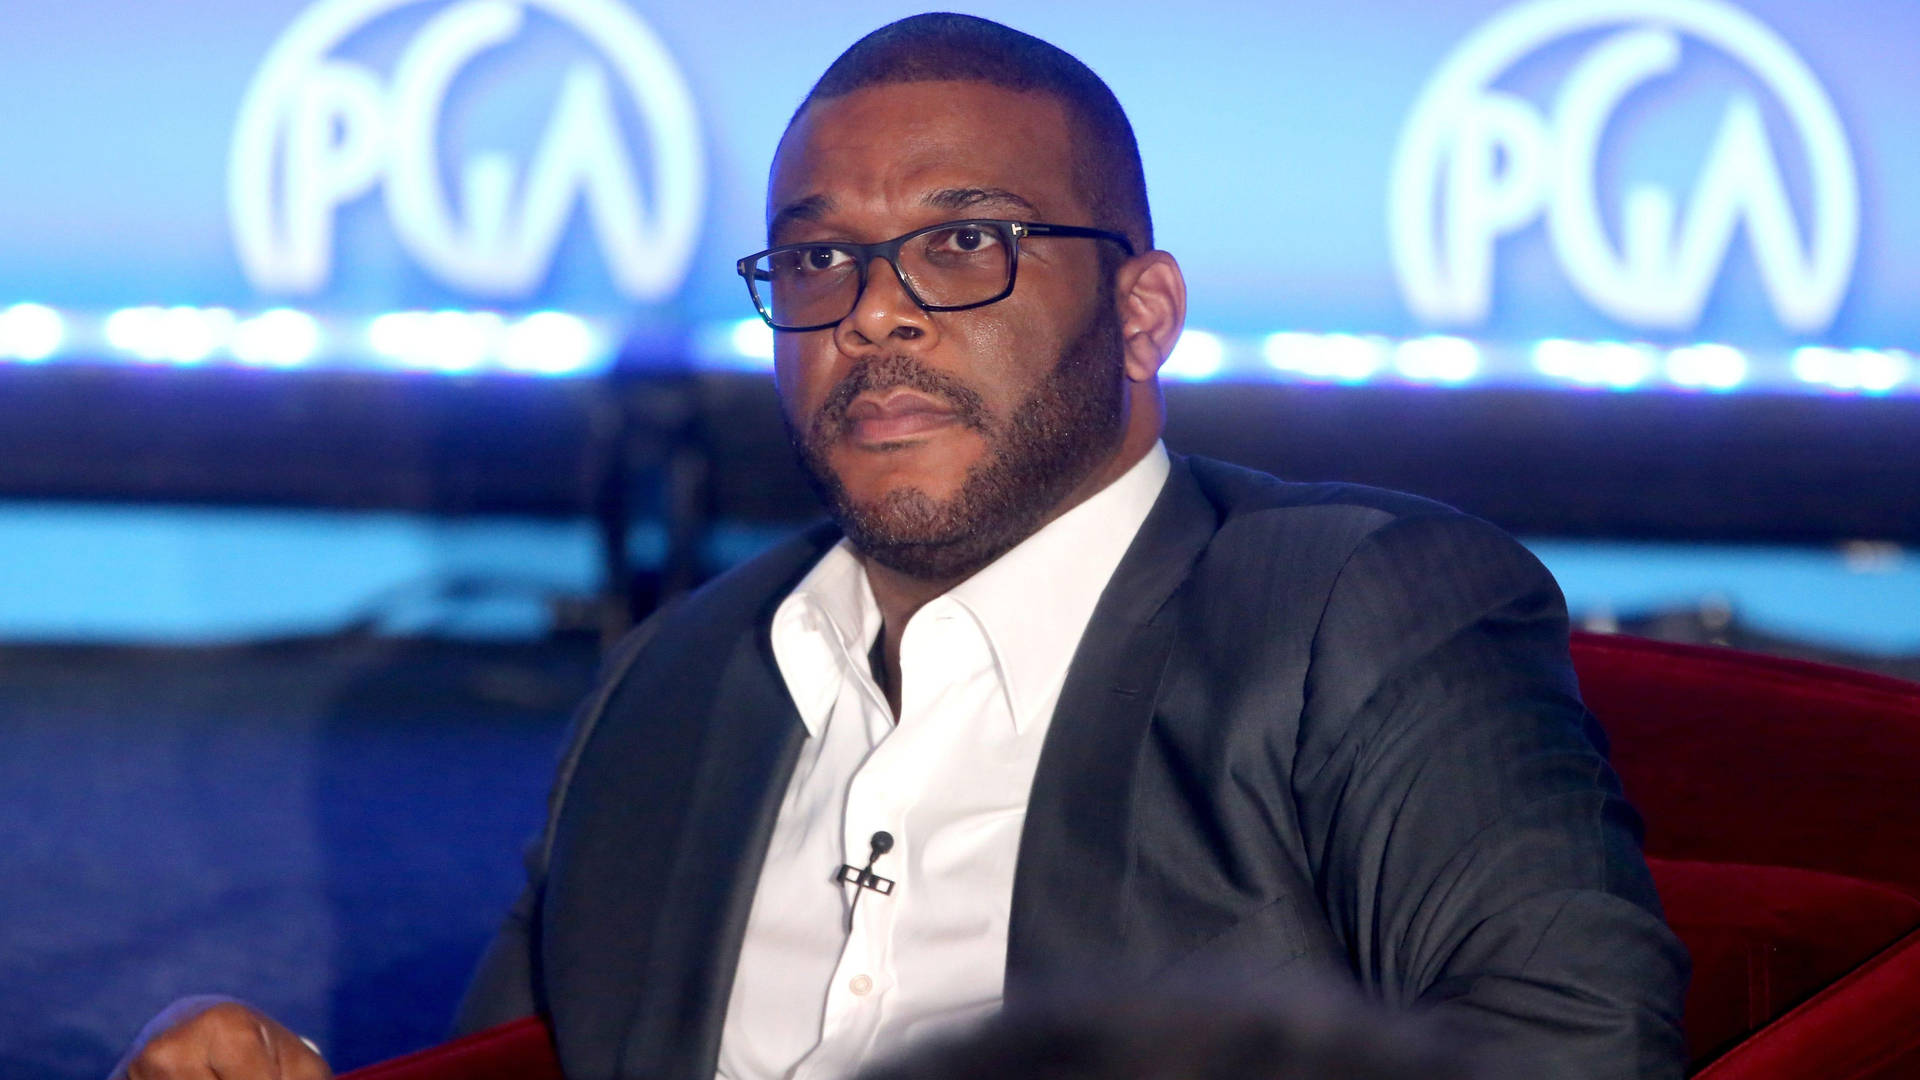 Caption: Award-winning film director Tyler Perry in a classic suit Wallpaper